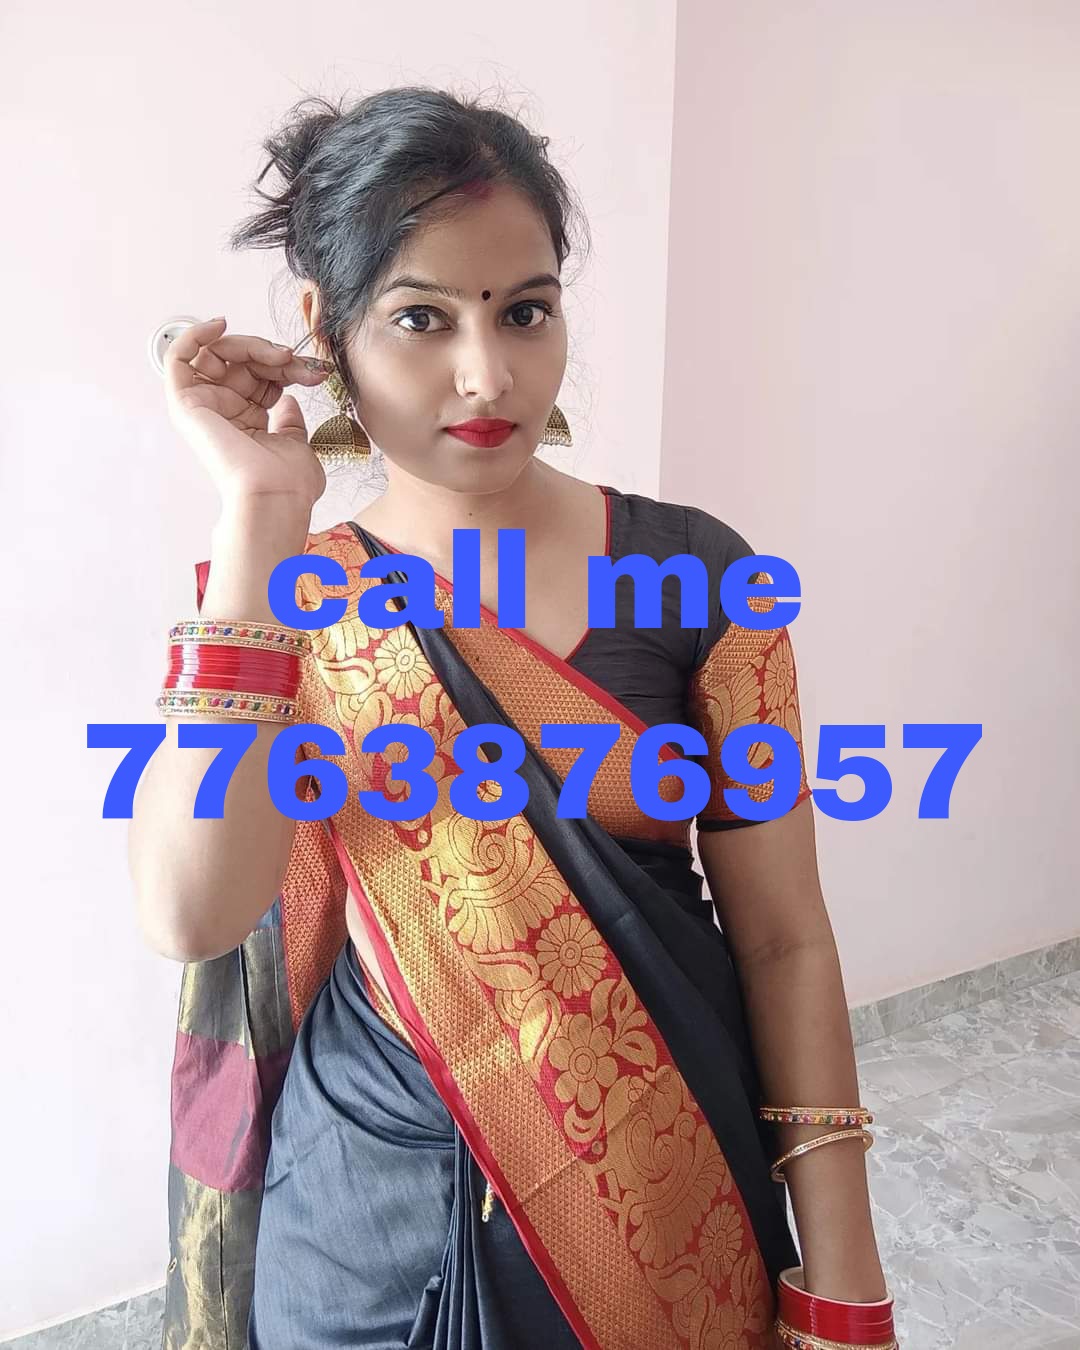 LOW PRICE CASH PAYMENT WHITEFIELD CALL GIRL 